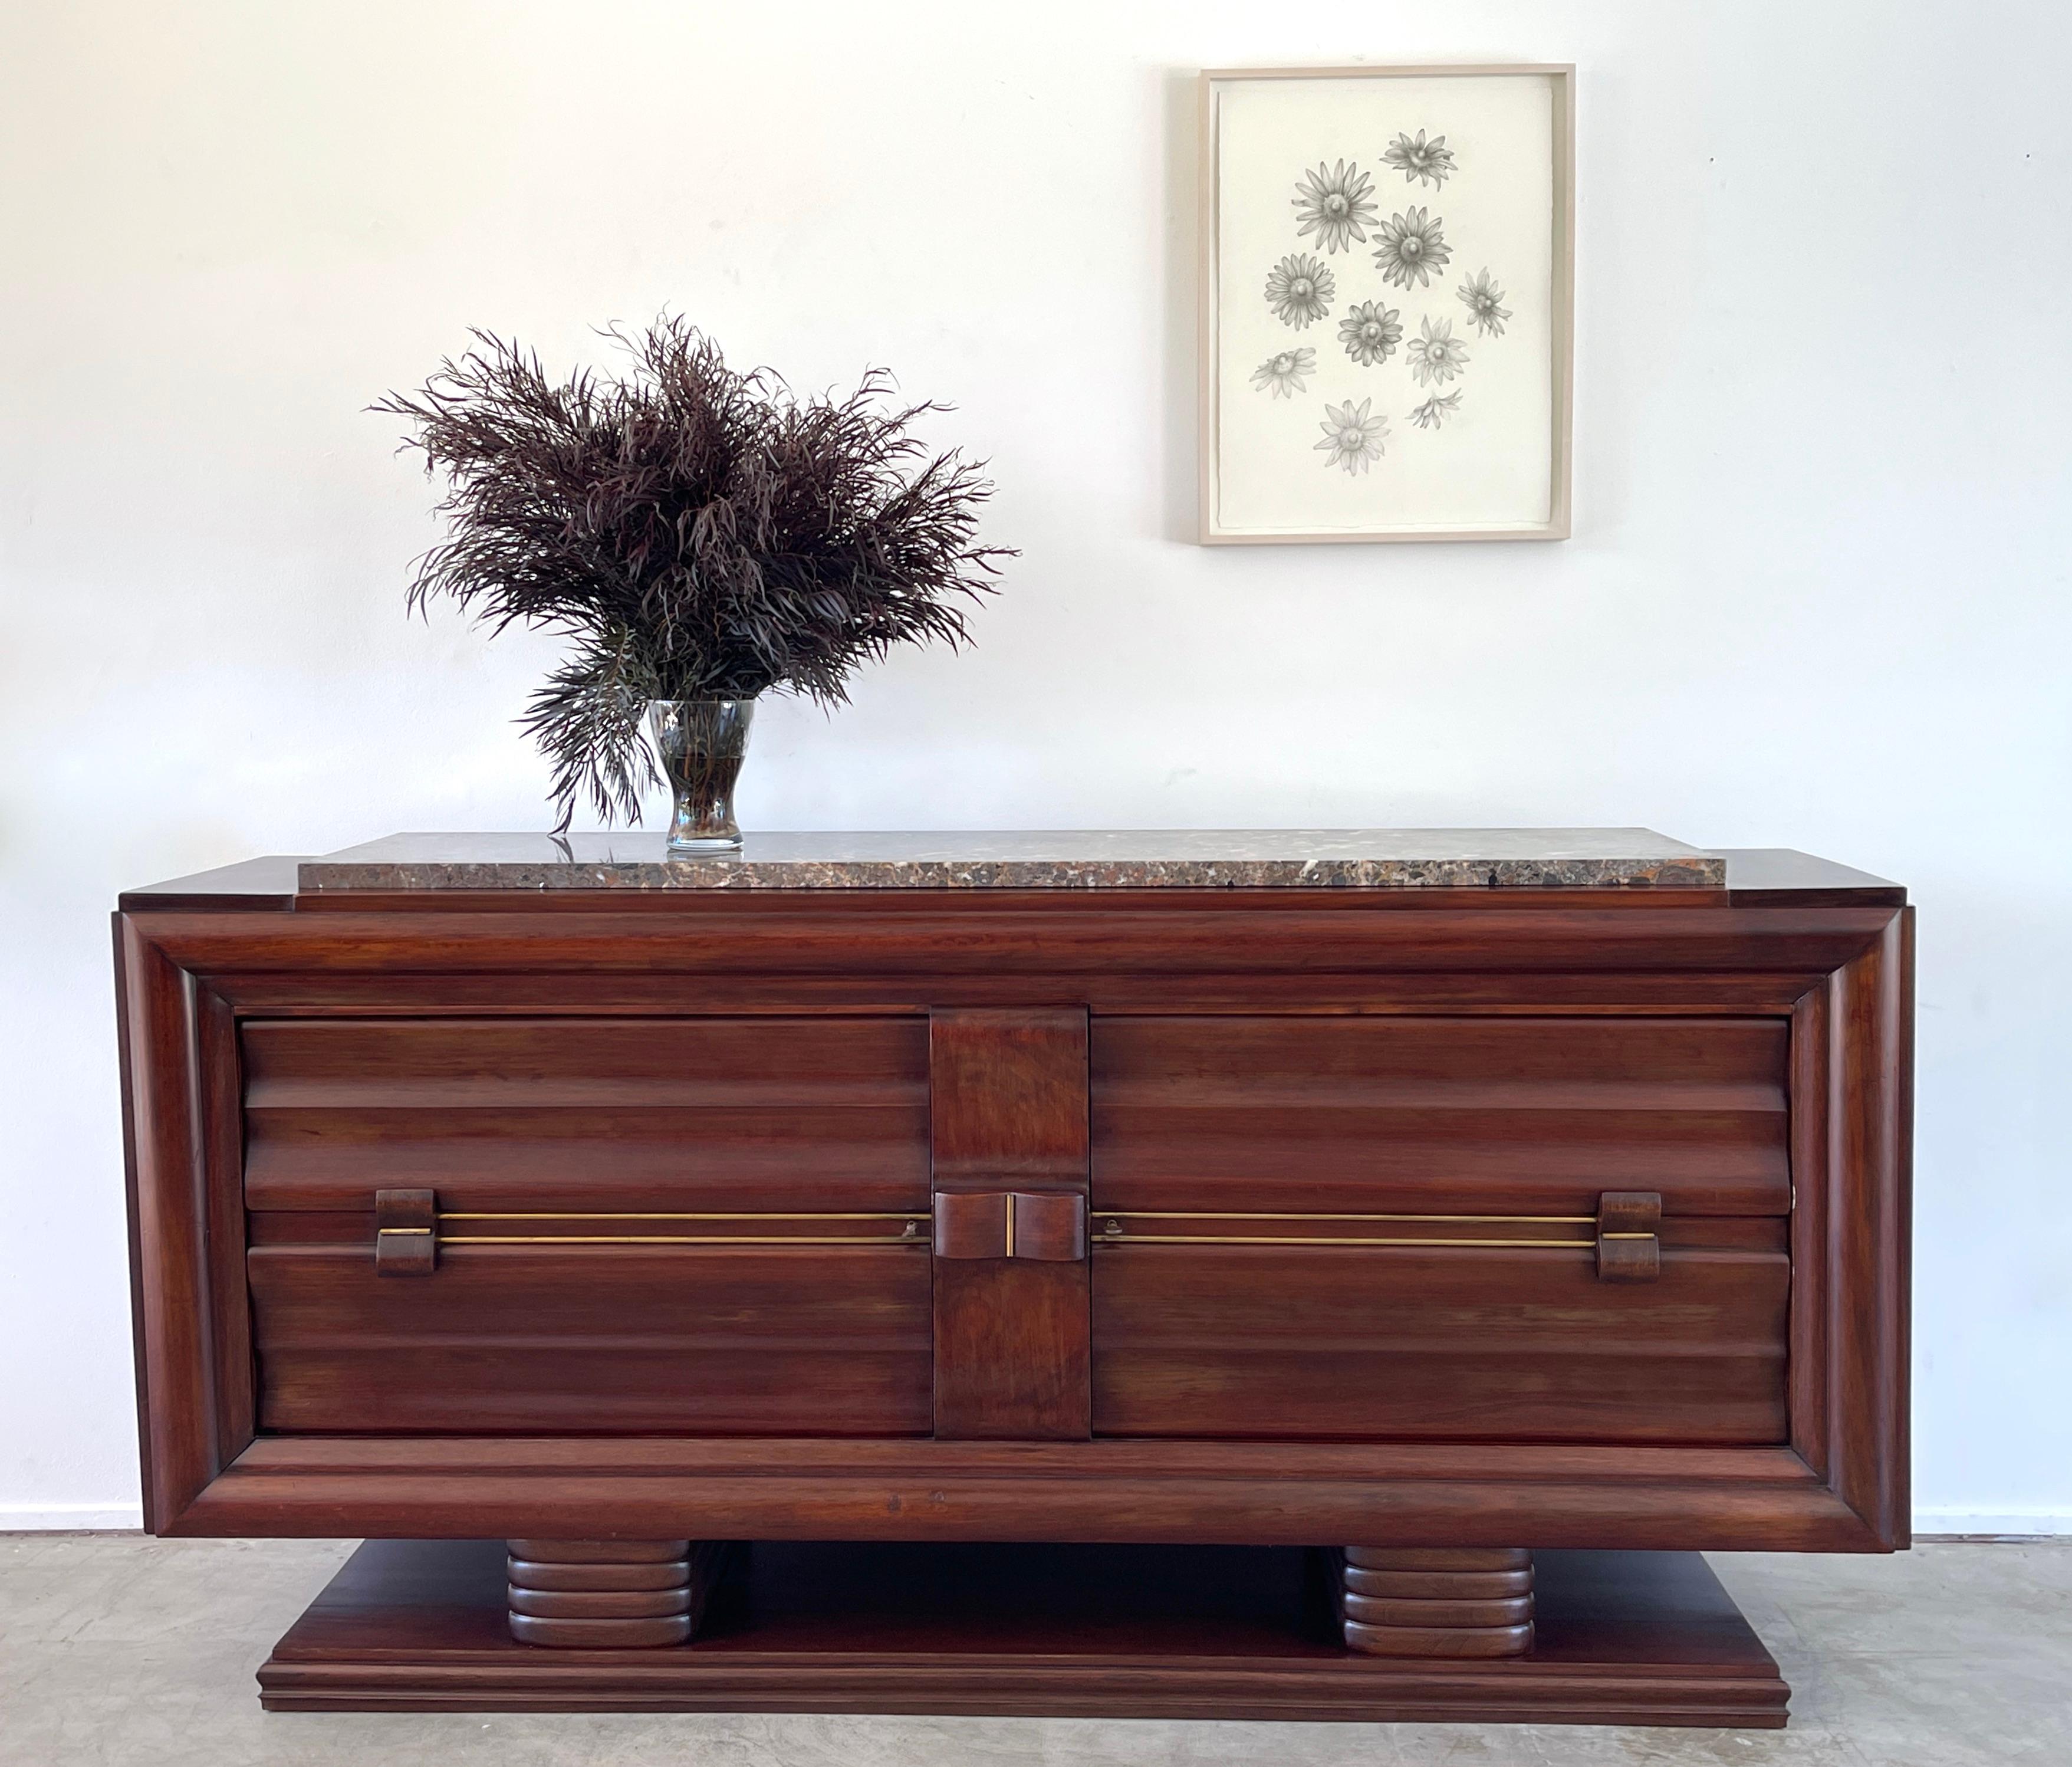 Incredible Art Deco Italian sideboard with marble top and simple clean lines

Brass inlaid and hardware / original dark wood stain 

2 Door cabinet opens to reveal hidden drawer with inlaid detail 

Undulating wood legs on plinth 

Incredible